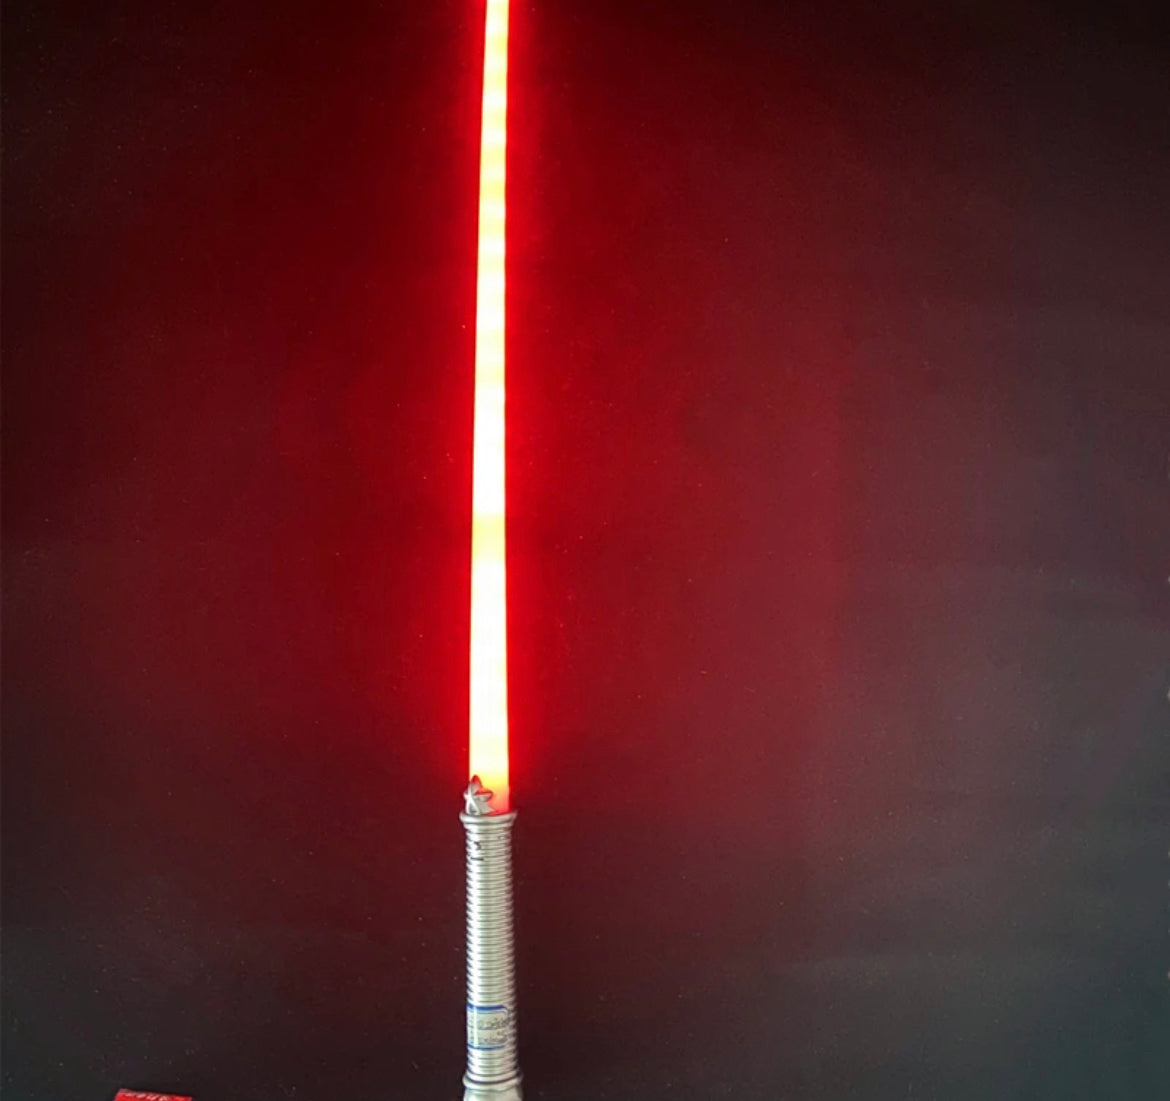 The Youngling Lightsaber